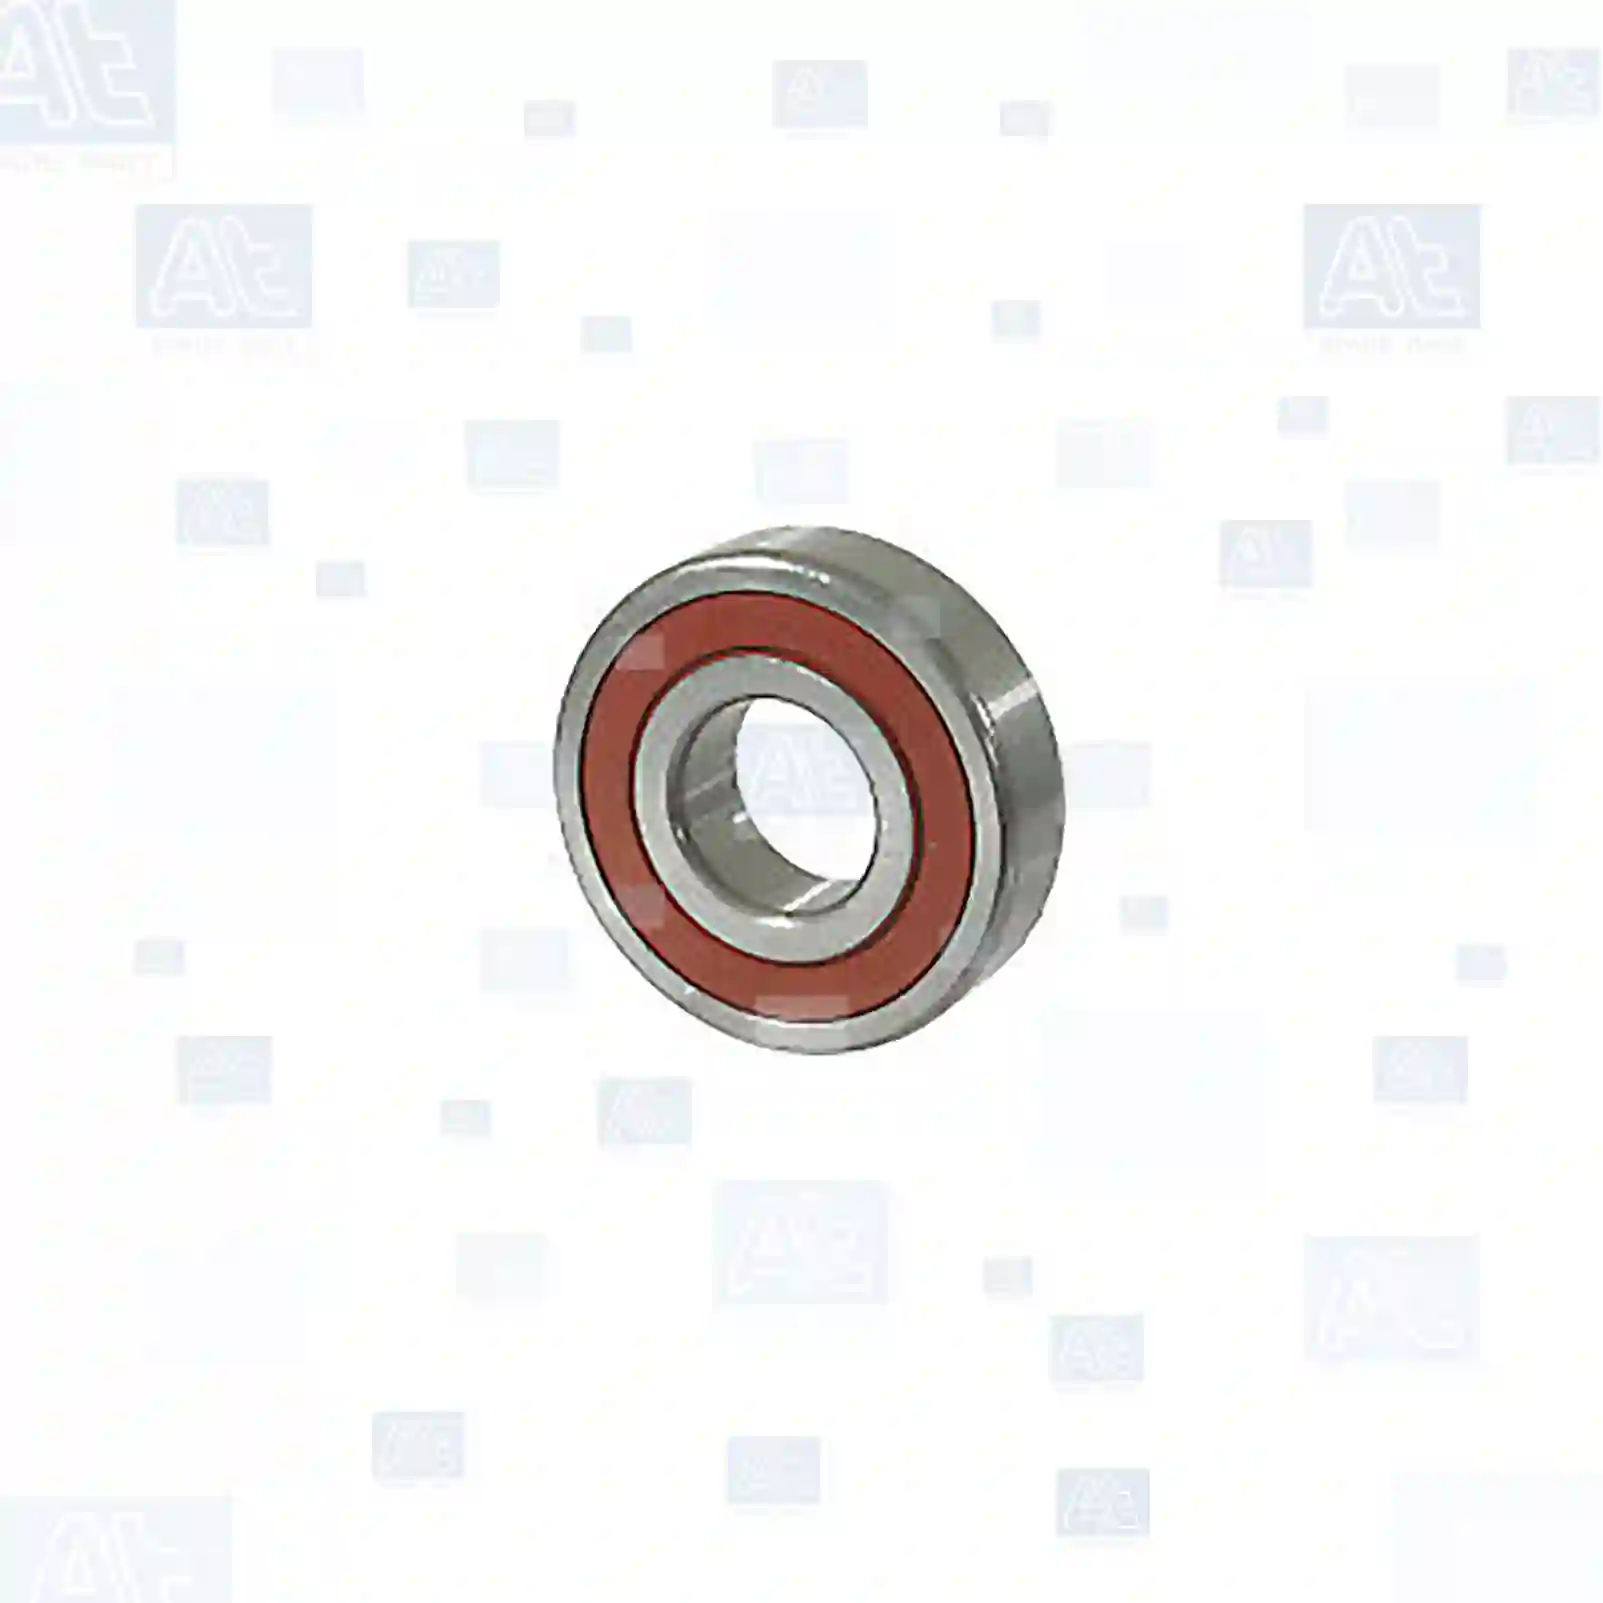 Ball bearing, 77710270, 1276434, 1376955, 68091, 01905280, 01905473, 07075306, 09935795, 09941754, 09960113, 09986035, 24941650, 60735995, 60751645, 60752009, 75207748, 82355484, 01905280, 01905473, 06314505902, 51934100129, 0029819025, 0049813425, 0059811925, 0059812005, 0059812025, 0059813325, 0089811225, 0089814625, 0089815825, 5000805018, 5001831953, 5001831956, 5001836335, 1314205, 1387613, 1422686, 1953794, 305156, 11705744, 12709022, 12709027, 1376955, 244328, 6889262, 694068, 85100098, 049903221A, 049903221C, 049903221F ||  77710270 At Spare Part | Engine, Accelerator Pedal, Camshaft, Connecting Rod, Crankcase, Crankshaft, Cylinder Head, Engine Suspension Mountings, Exhaust Manifold, Exhaust Gas Recirculation, Filter Kits, Flywheel Housing, General Overhaul Kits, Engine, Intake Manifold, Oil Cleaner, Oil Cooler, Oil Filter, Oil Pump, Oil Sump, Piston & Liner, Sensor & Switch, Timing Case, Turbocharger, Cooling System, Belt Tensioner, Coolant Filter, Coolant Pipe, Corrosion Prevention Agent, Drive, Expansion Tank, Fan, Intercooler, Monitors & Gauges, Radiator, Thermostat, V-Belt / Timing belt, Water Pump, Fuel System, Electronical Injector Unit, Feed Pump, Fuel Filter, cpl., Fuel Gauge Sender,  Fuel Line, Fuel Pump, Fuel Tank, Injection Line Kit, Injection Pump, Exhaust System, Clutch & Pedal, Gearbox, Propeller Shaft, Axles, Brake System, Hubs & Wheels, Suspension, Leaf Spring, Universal Parts / Accessories, Steering, Electrical System, Cabin Ball bearing, 77710270, 1276434, 1376955, 68091, 01905280, 01905473, 07075306, 09935795, 09941754, 09960113, 09986035, 24941650, 60735995, 60751645, 60752009, 75207748, 82355484, 01905280, 01905473, 06314505902, 51934100129, 0029819025, 0049813425, 0059811925, 0059812005, 0059812025, 0059813325, 0089811225, 0089814625, 0089815825, 5000805018, 5001831953, 5001831956, 5001836335, 1314205, 1387613, 1422686, 1953794, 305156, 11705744, 12709022, 12709027, 1376955, 244328, 6889262, 694068, 85100098, 049903221A, 049903221C, 049903221F ||  77710270 At Spare Part | Engine, Accelerator Pedal, Camshaft, Connecting Rod, Crankcase, Crankshaft, Cylinder Head, Engine Suspension Mountings, Exhaust Manifold, Exhaust Gas Recirculation, Filter Kits, Flywheel Housing, General Overhaul Kits, Engine, Intake Manifold, Oil Cleaner, Oil Cooler, Oil Filter, Oil Pump, Oil Sump, Piston & Liner, Sensor & Switch, Timing Case, Turbocharger, Cooling System, Belt Tensioner, Coolant Filter, Coolant Pipe, Corrosion Prevention Agent, Drive, Expansion Tank, Fan, Intercooler, Monitors & Gauges, Radiator, Thermostat, V-Belt / Timing belt, Water Pump, Fuel System, Electronical Injector Unit, Feed Pump, Fuel Filter, cpl., Fuel Gauge Sender,  Fuel Line, Fuel Pump, Fuel Tank, Injection Line Kit, Injection Pump, Exhaust System, Clutch & Pedal, Gearbox, Propeller Shaft, Axles, Brake System, Hubs & Wheels, Suspension, Leaf Spring, Universal Parts / Accessories, Steering, Electrical System, Cabin